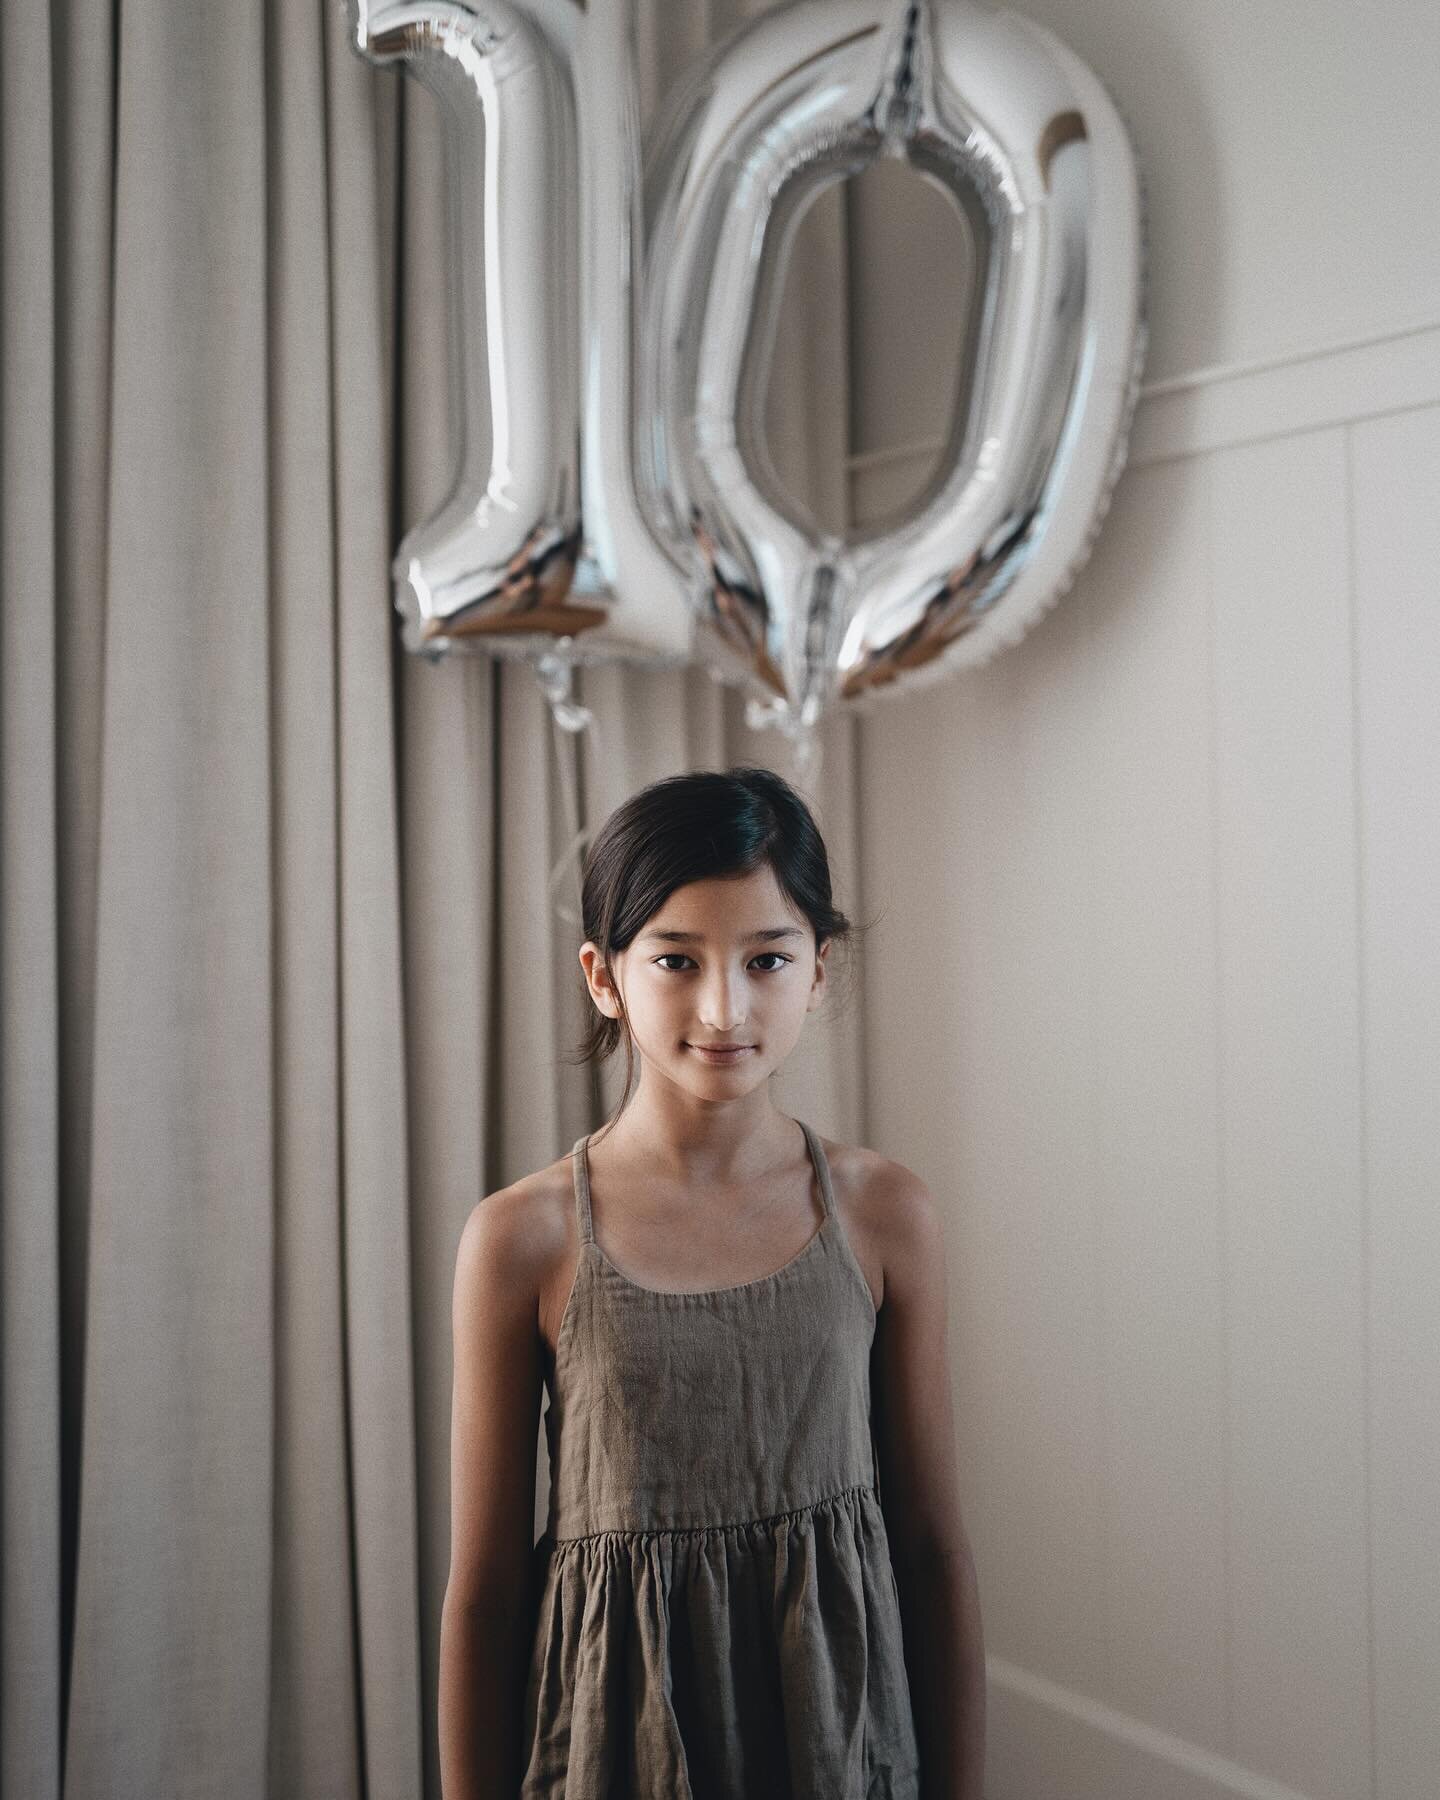 Wishing this one the happiest #10thbirthday with us @ronitlee . Please don&rsquo;t grow up so quick my love 🖤 🖤 🖤